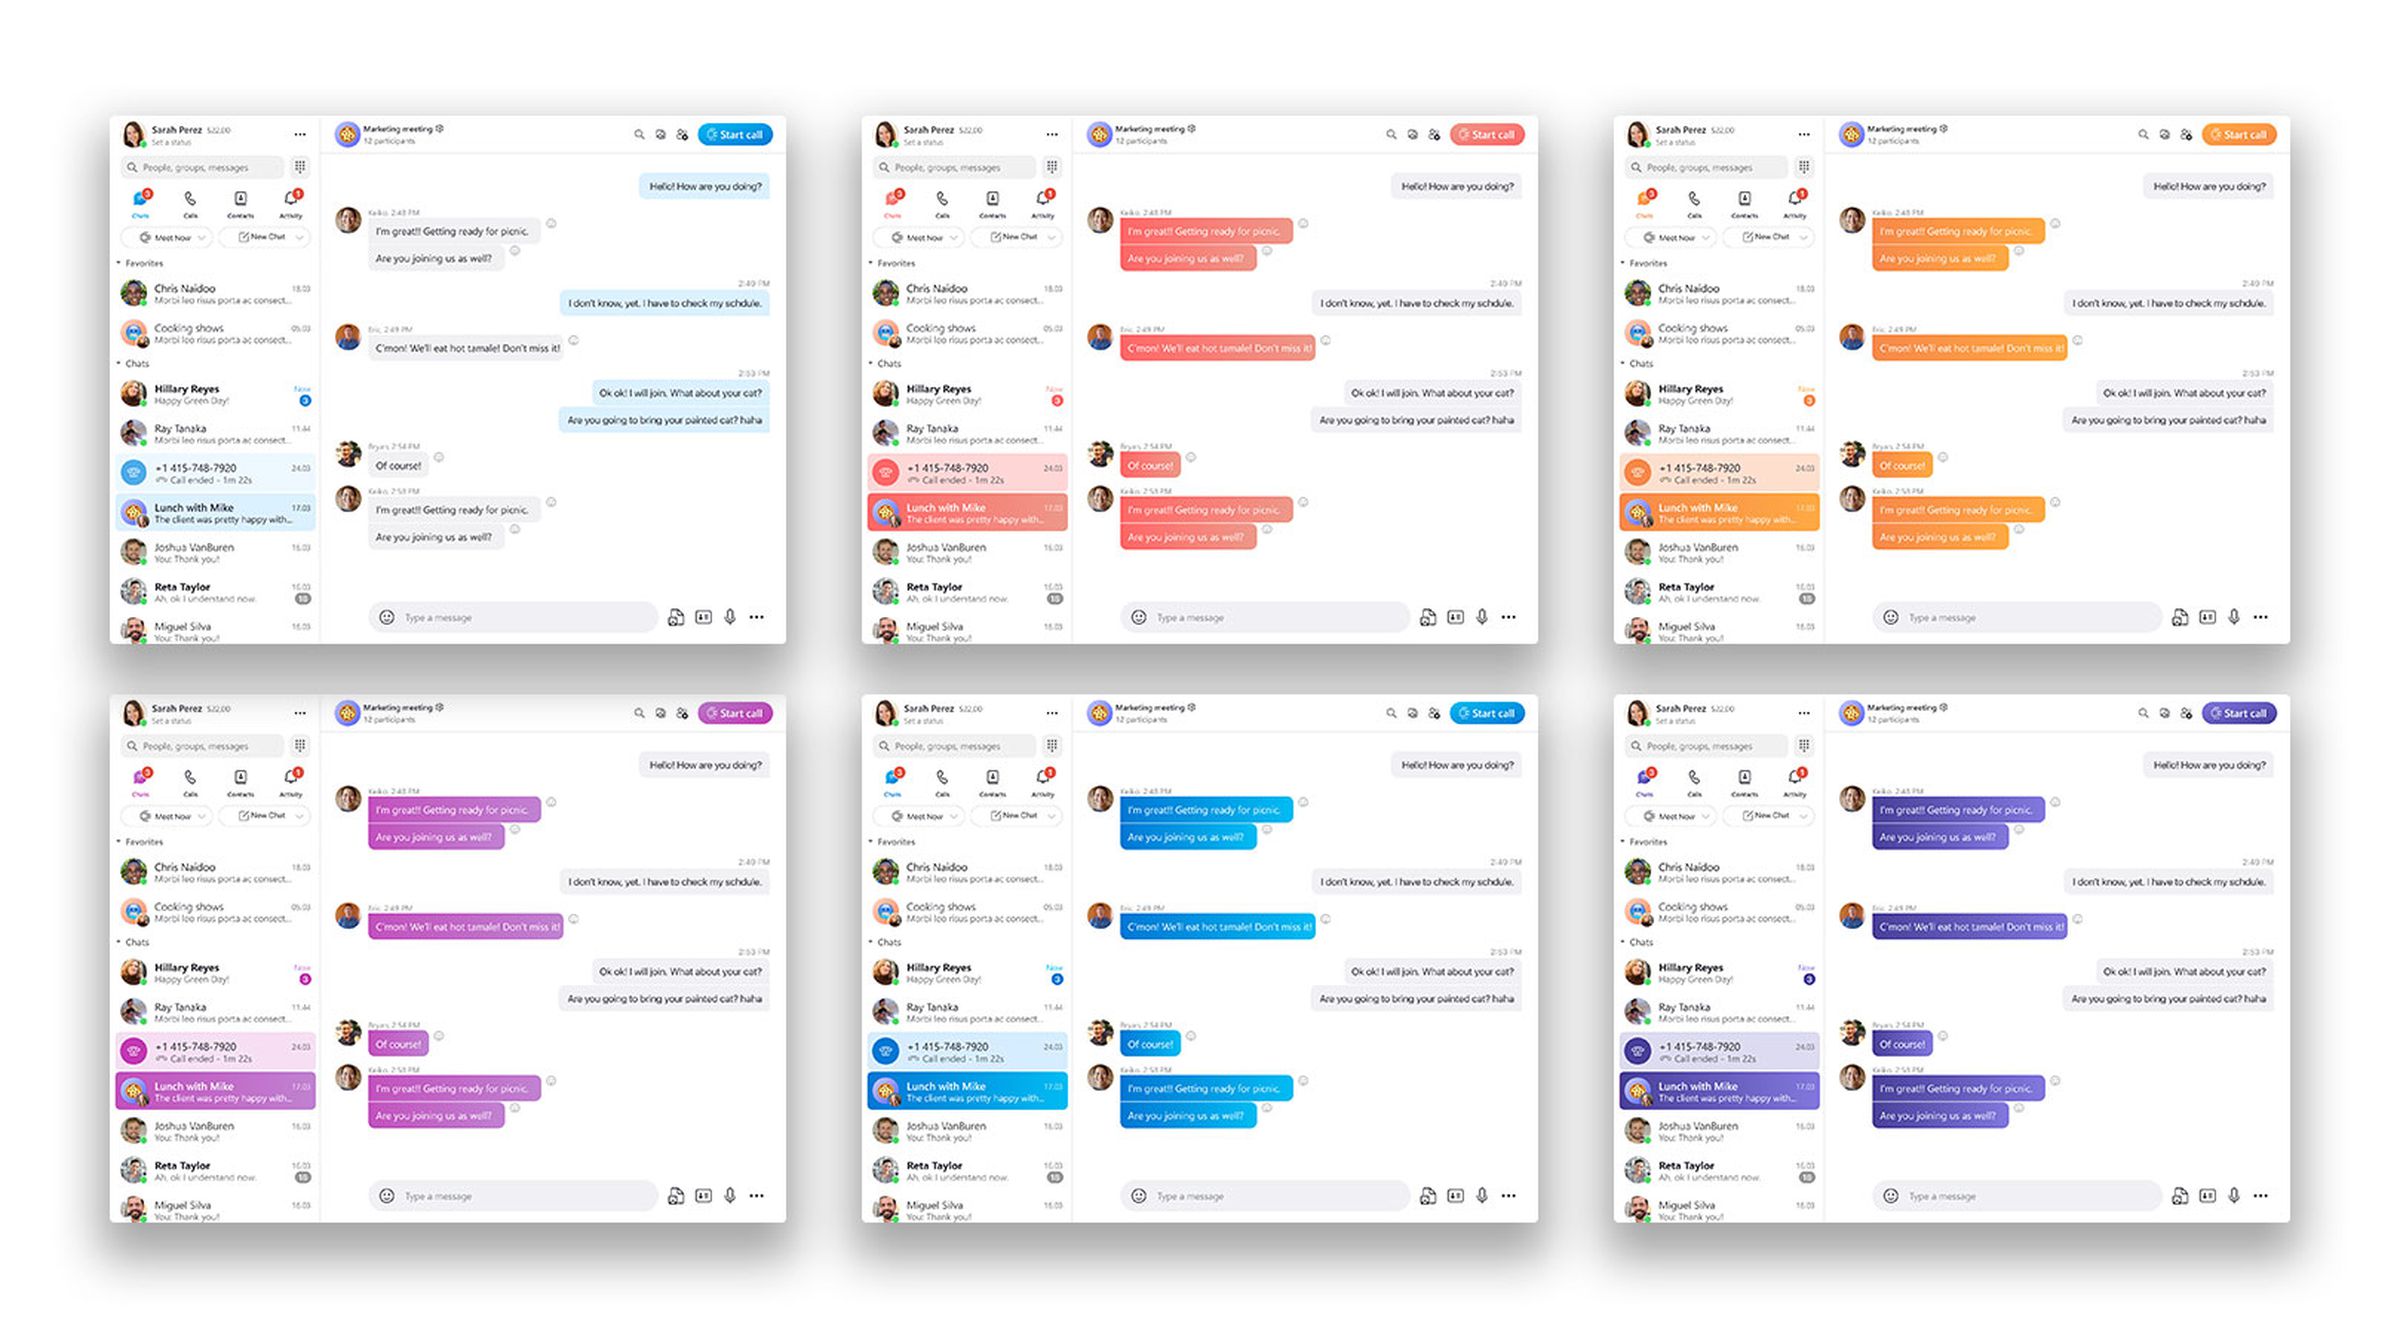 Skype’s colorful new themes.